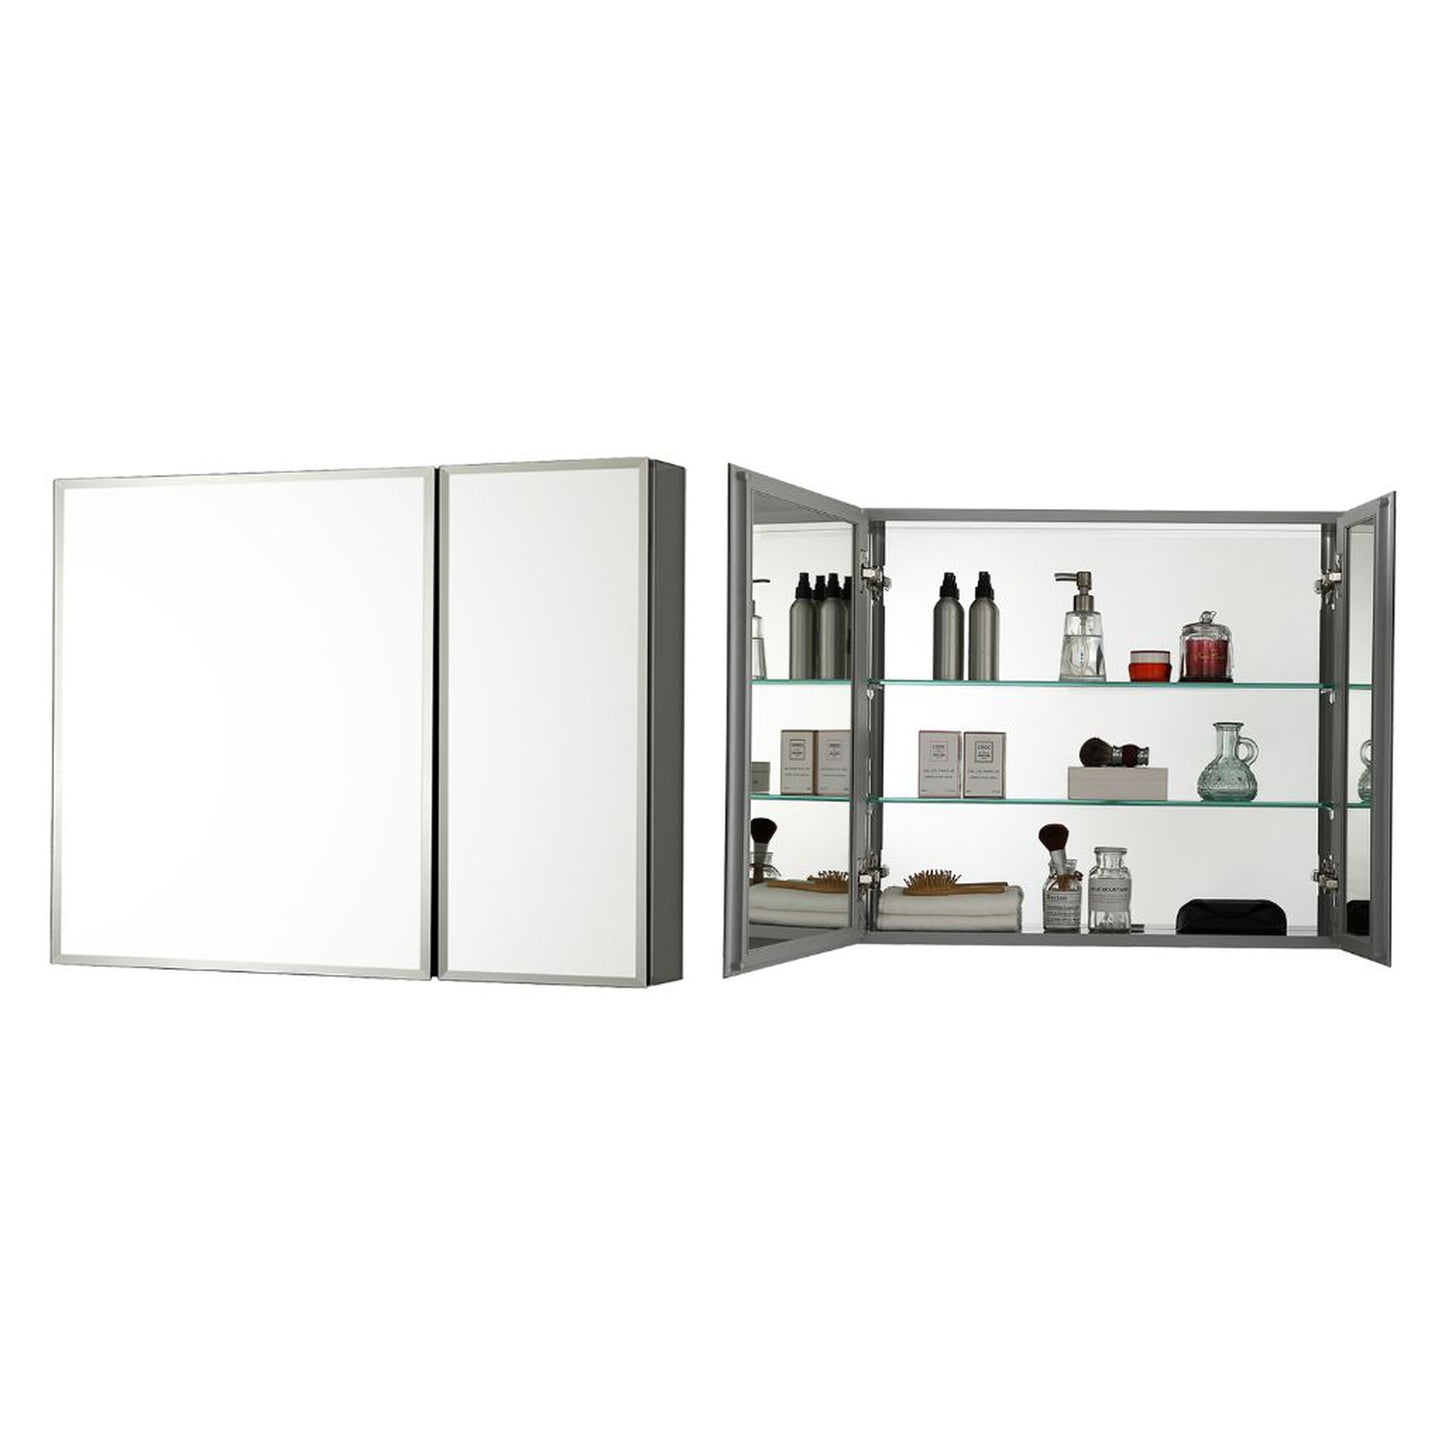 Blossom MC8 30" x 26" Recessed or Surface Mount 2-Door Aluminum Medicine Cabinet With Mirror, Adjustable Hinges and Adjustable Glass Shelves